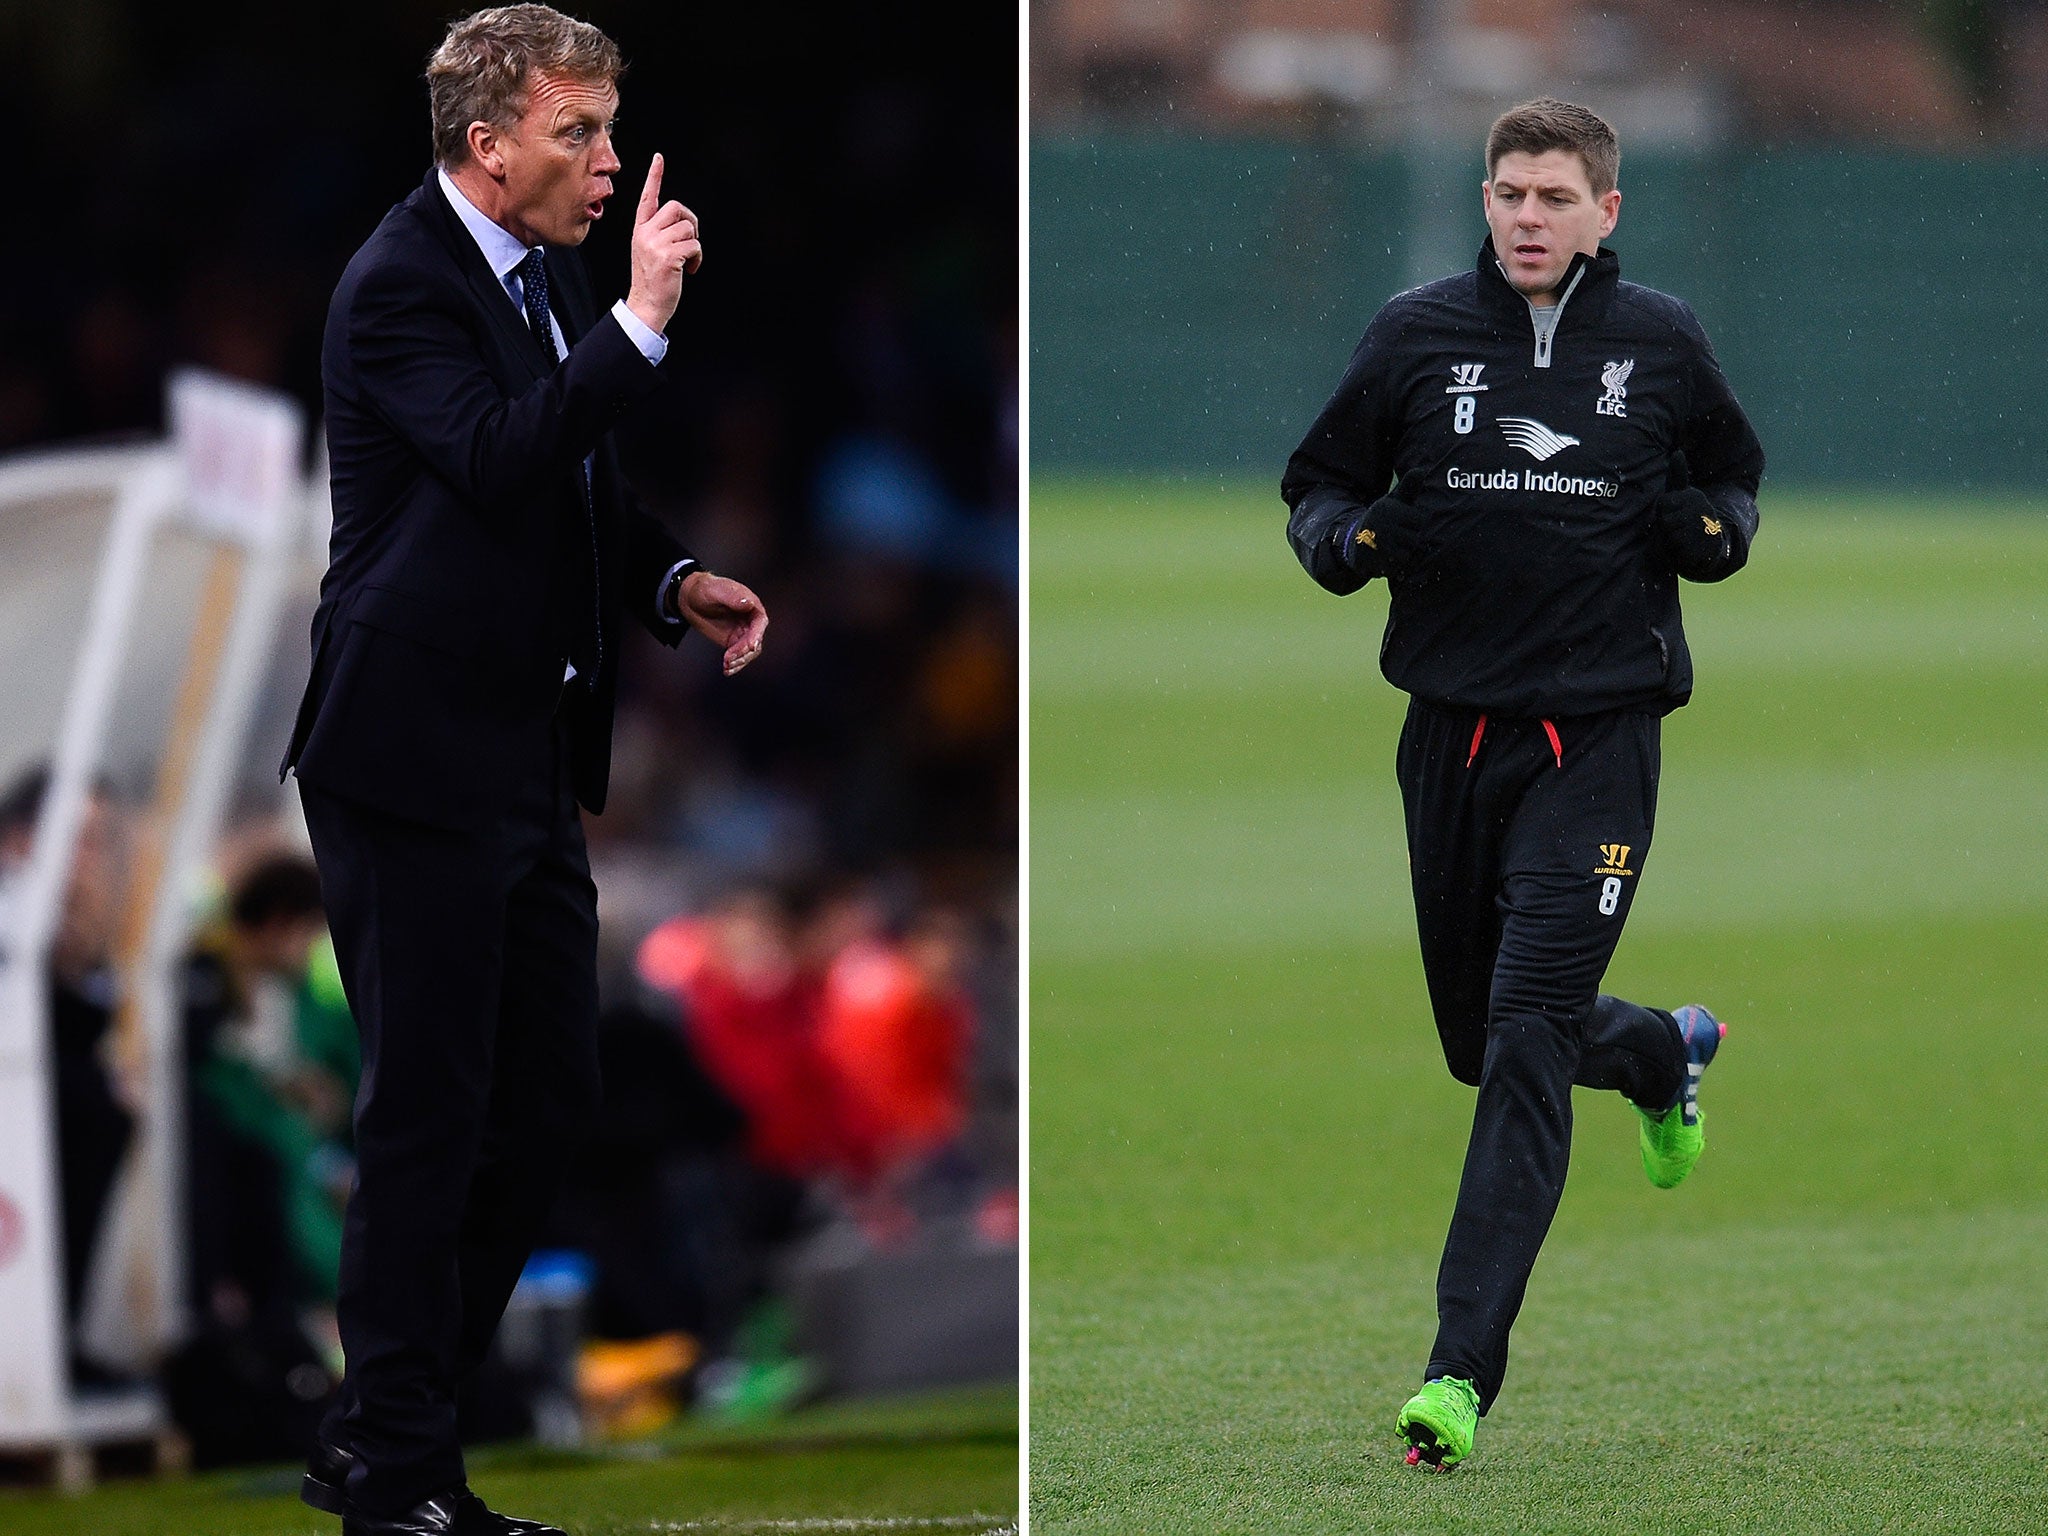 David Moyes admitted he would like to have Steven Gerrard at Real Sociedad